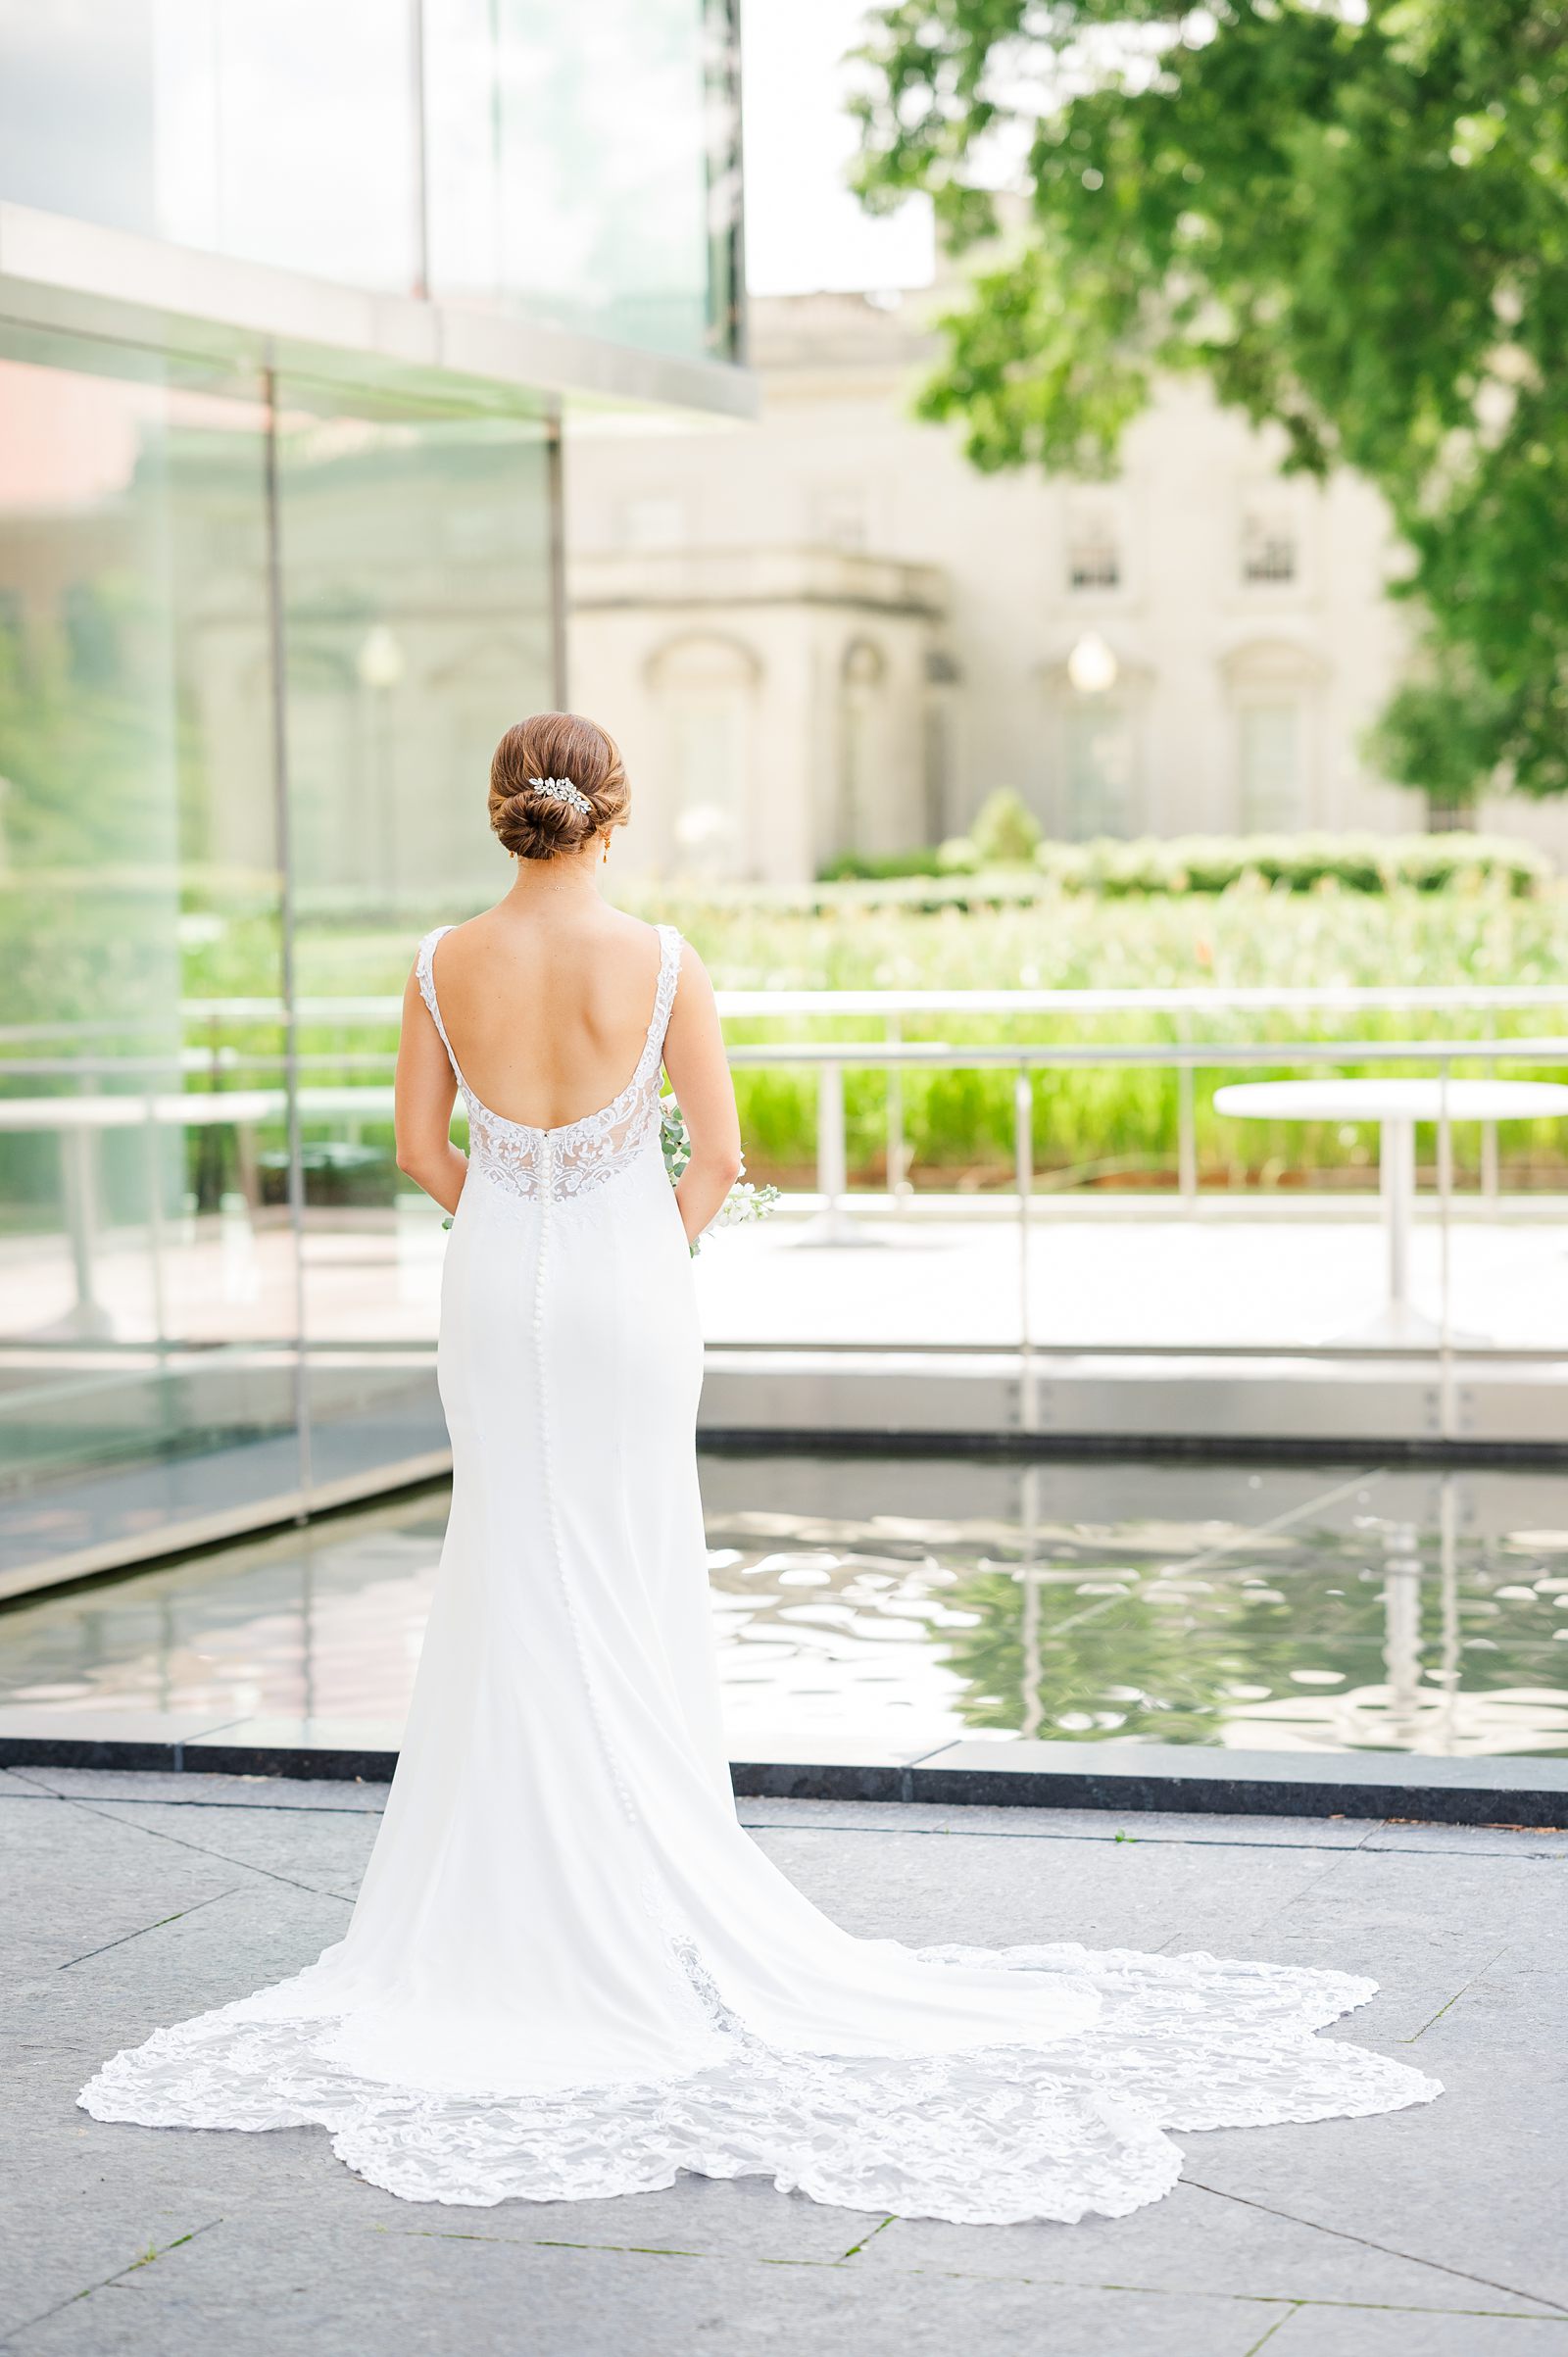 Bridal Portraits at Summer VMFA Wedding in Richmond by Kailey Brianne Photography 